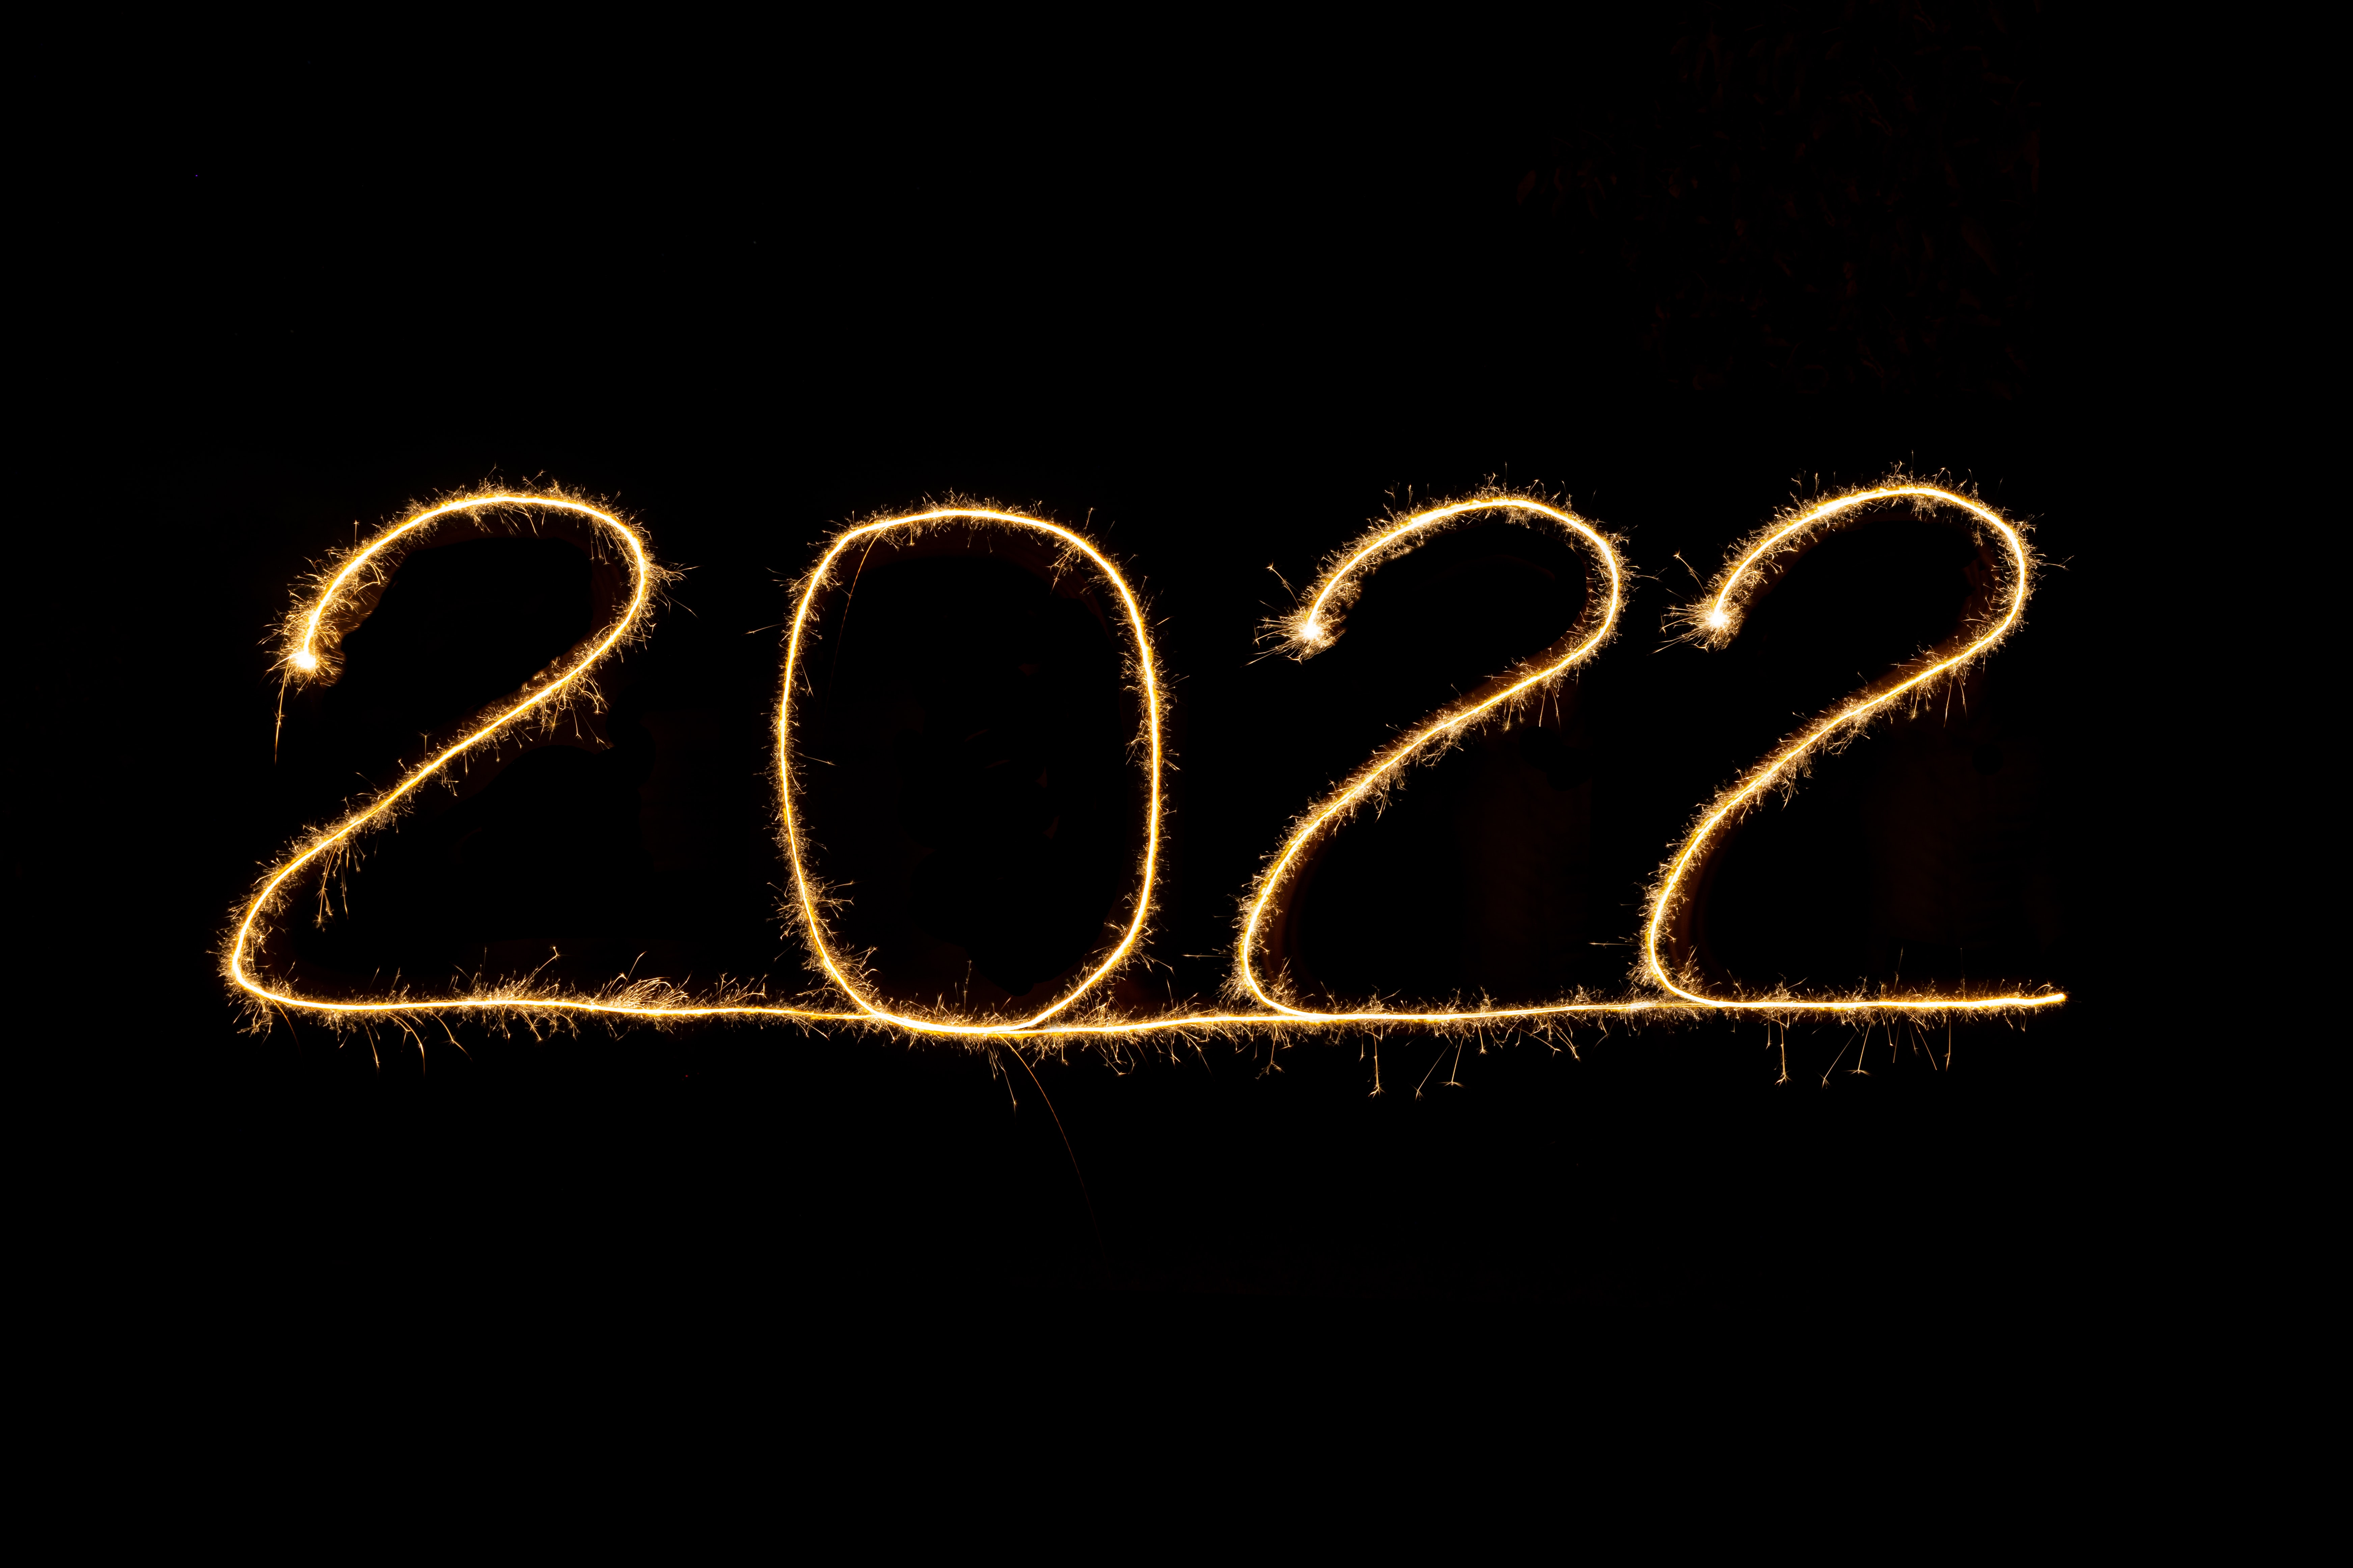 Things to look forward to in 2022 - coming soon